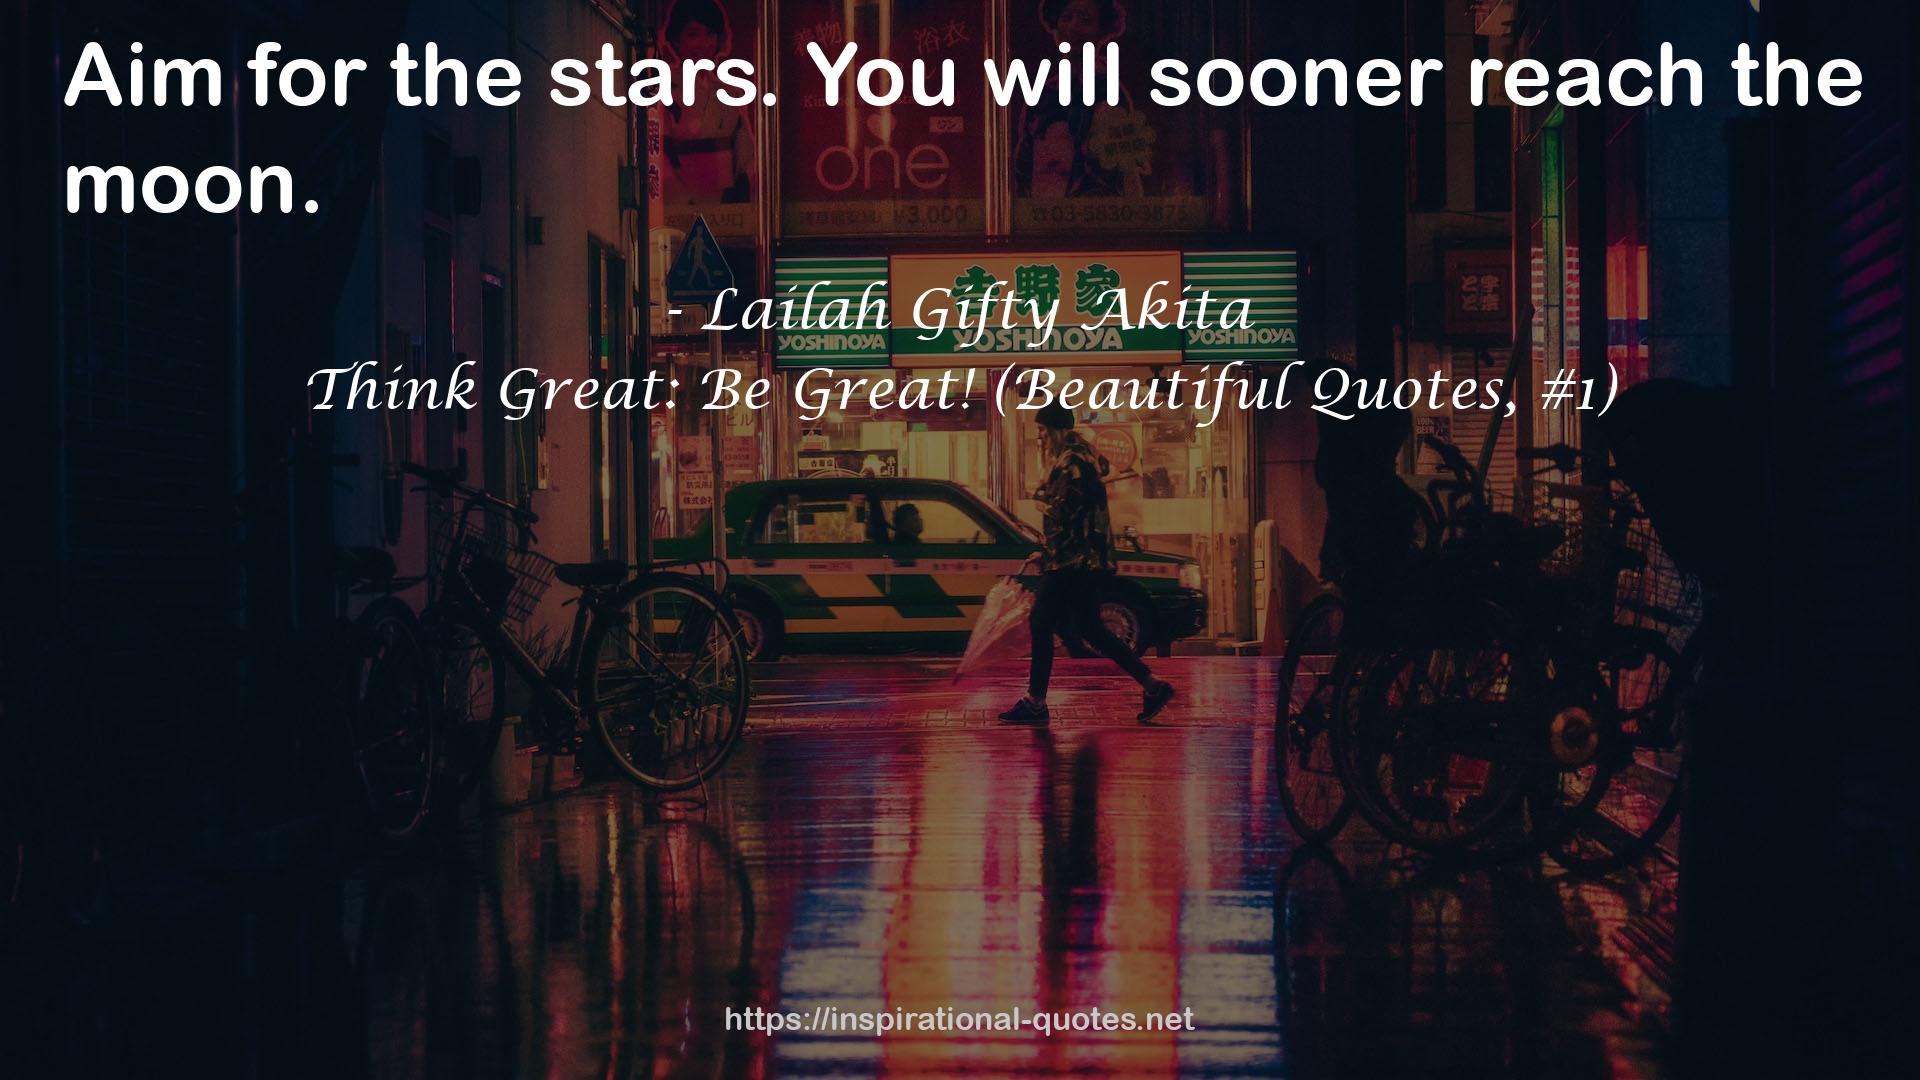 Think Great: Be Great! (Beautiful Quotes, #1) QUOTES